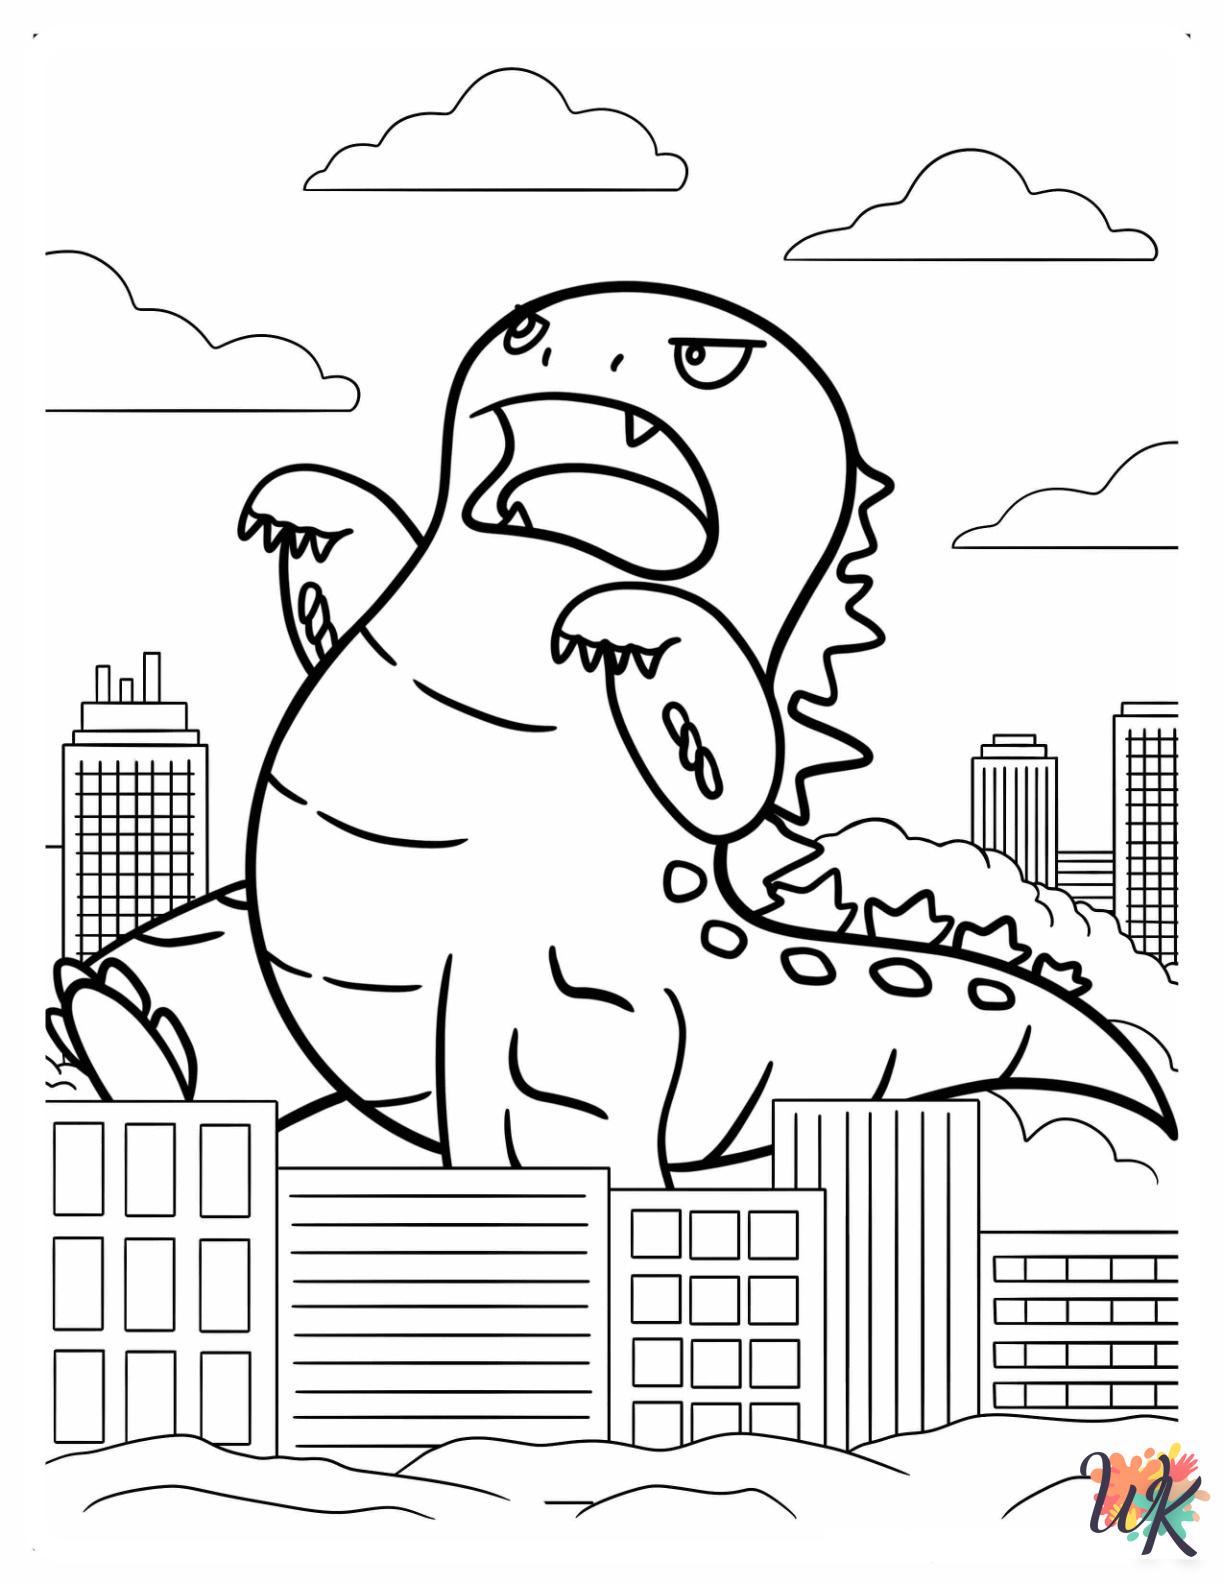 detailed Godzilla coloring pages for adults